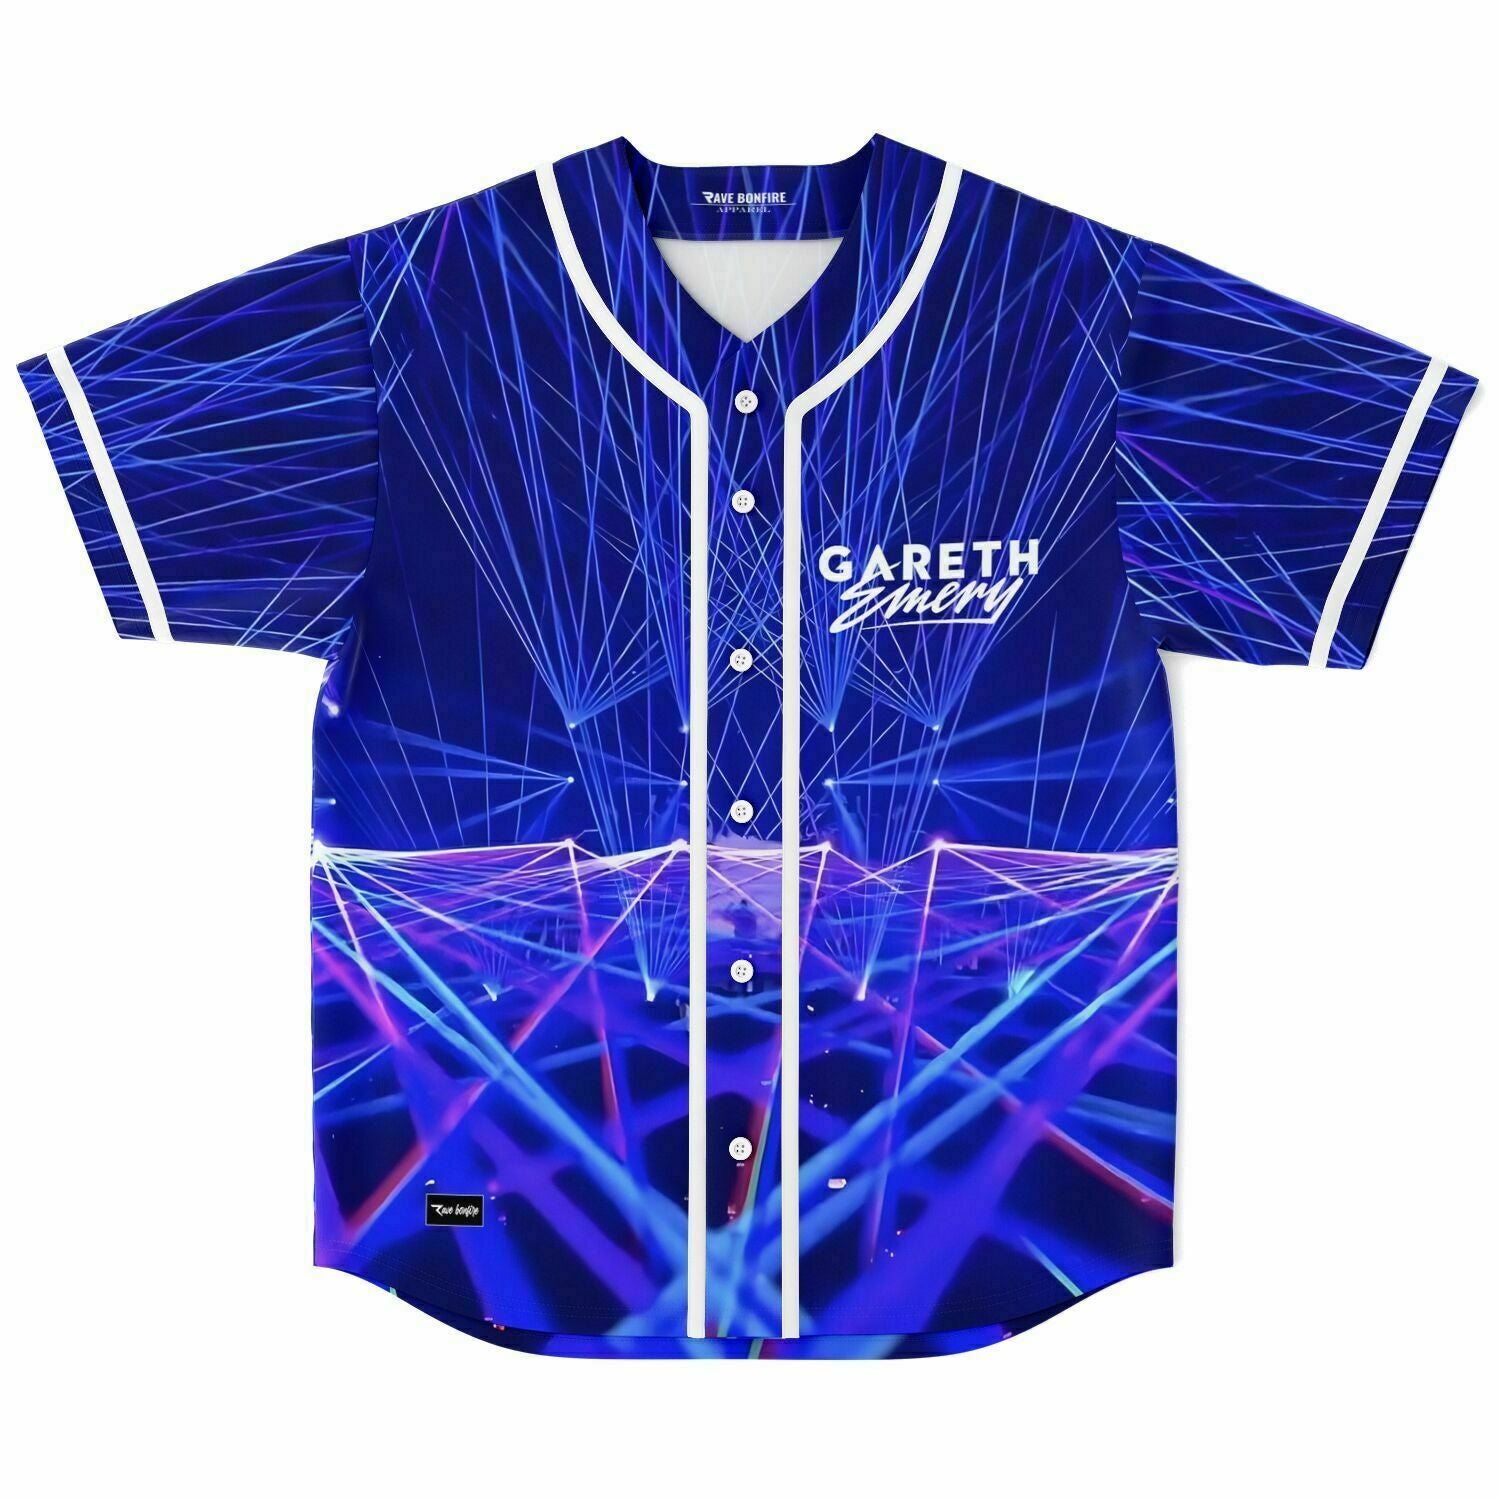 A Mike Go custom Baseball Jersey with a blue and white design.